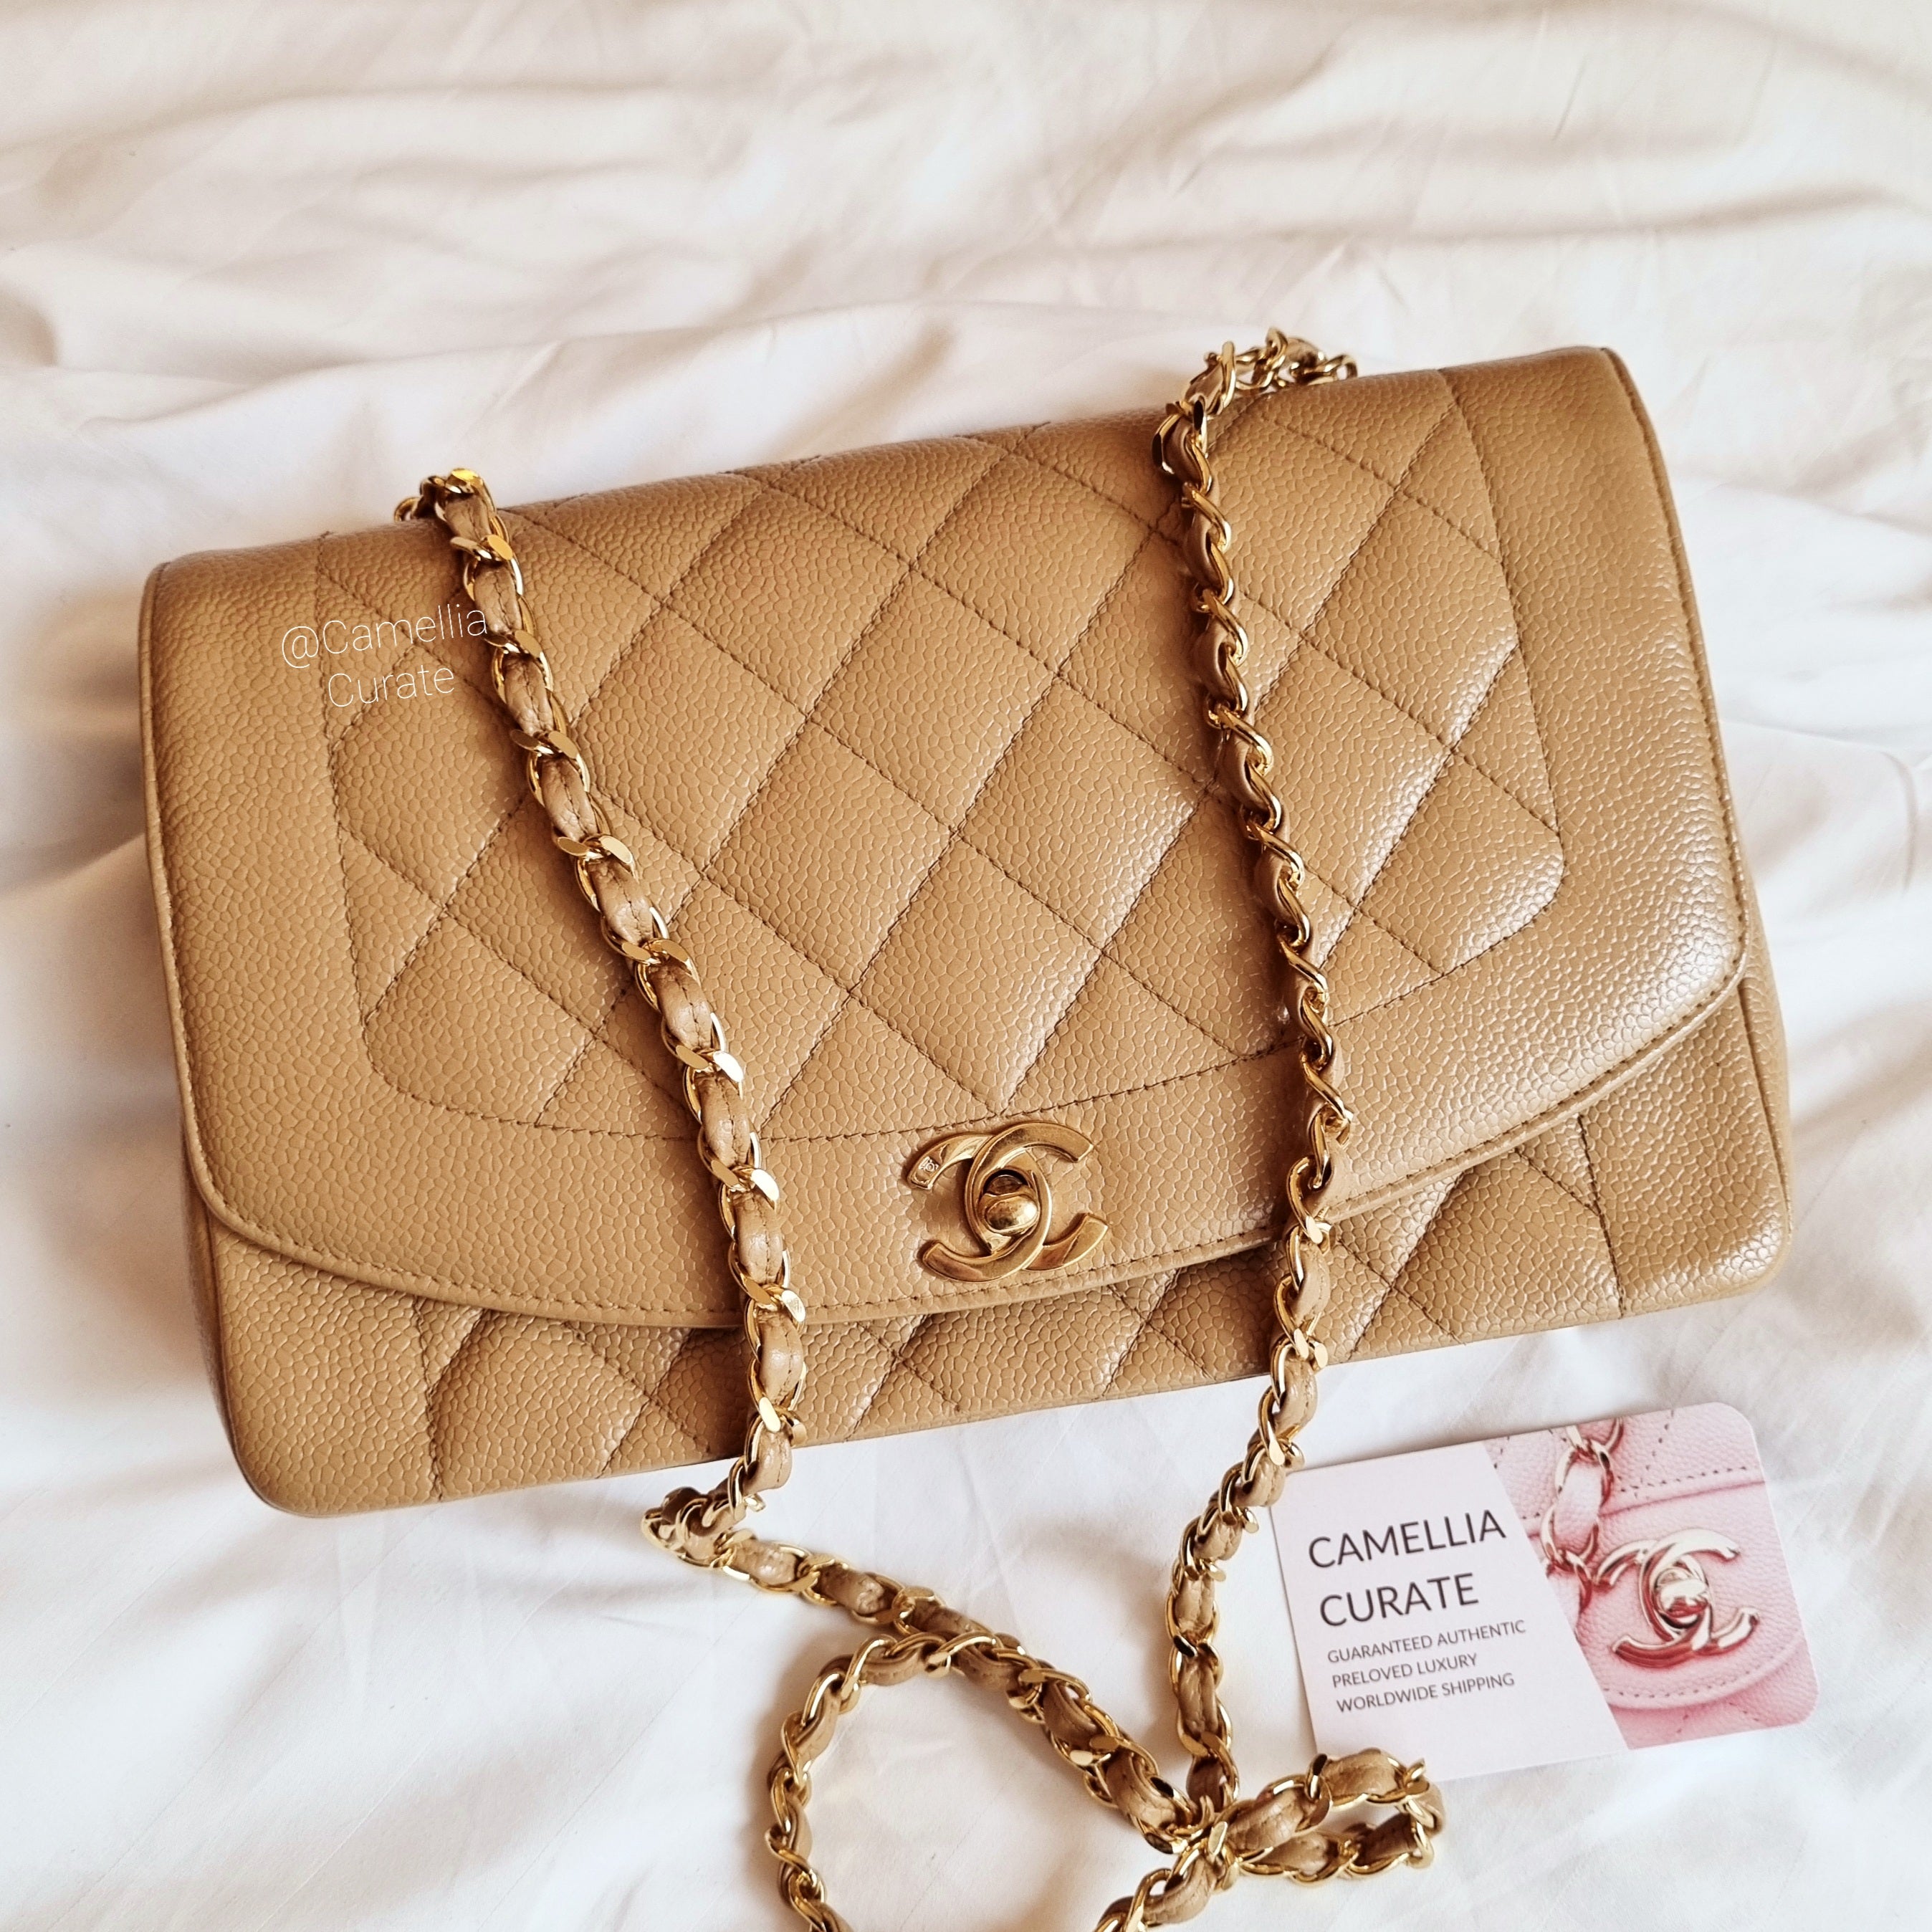 🍦 [SOLD VIA STORIES] VINTAGE CHANEL LADY DIANA SMALL FLAP BAG